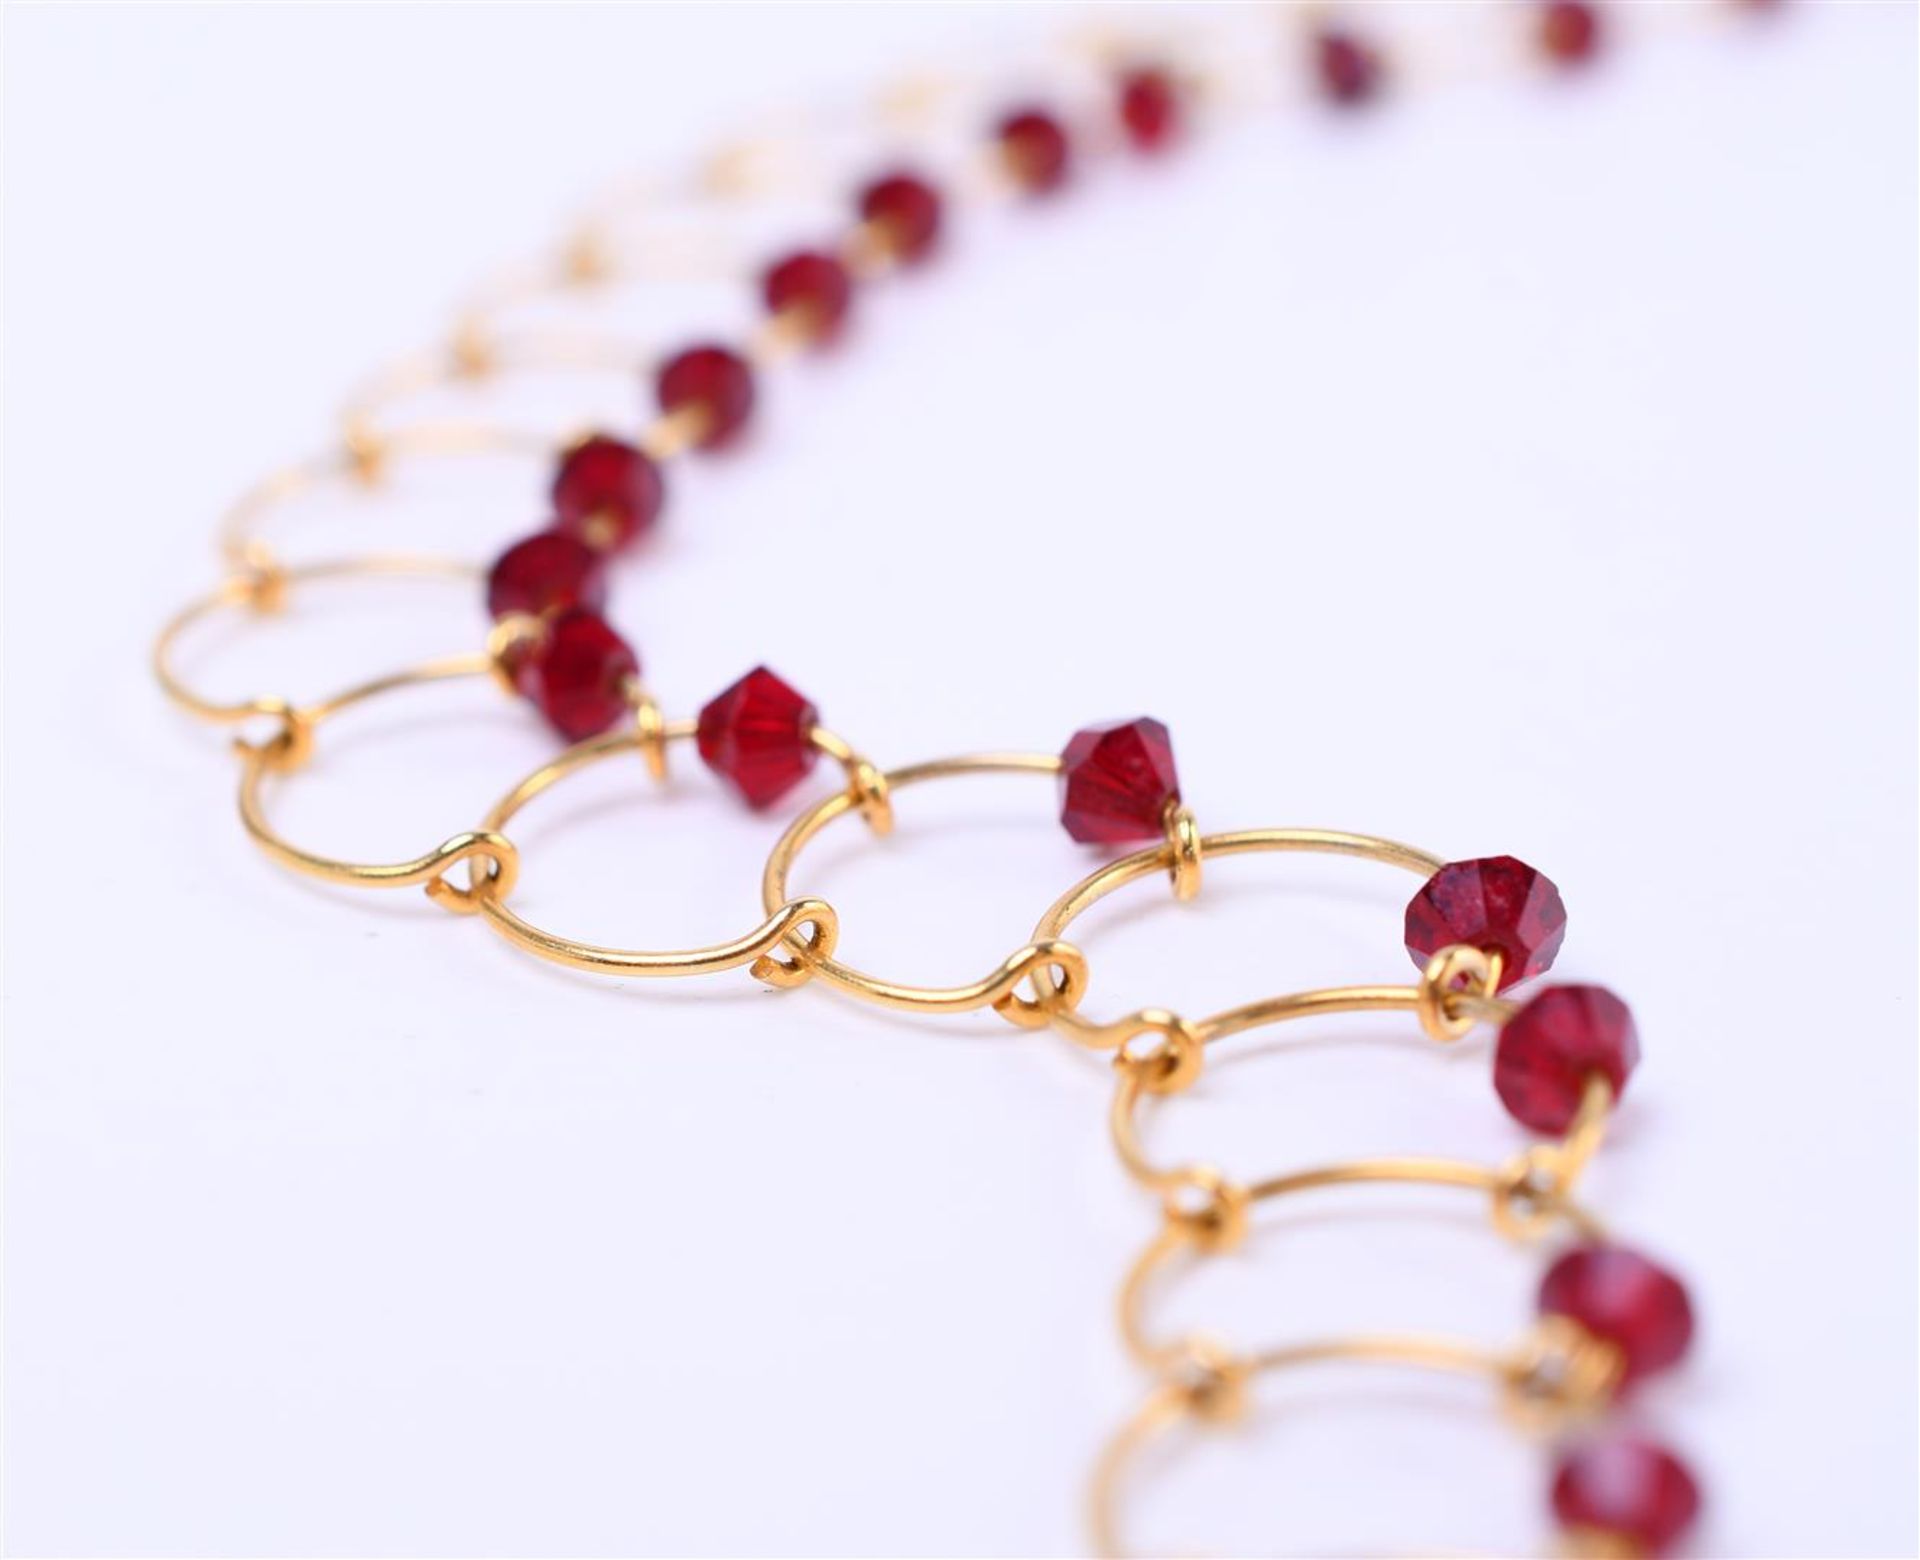 14 kt yellow gold wire necklace set with red crystal stones. Necklace length 41cm - Image 4 of 6